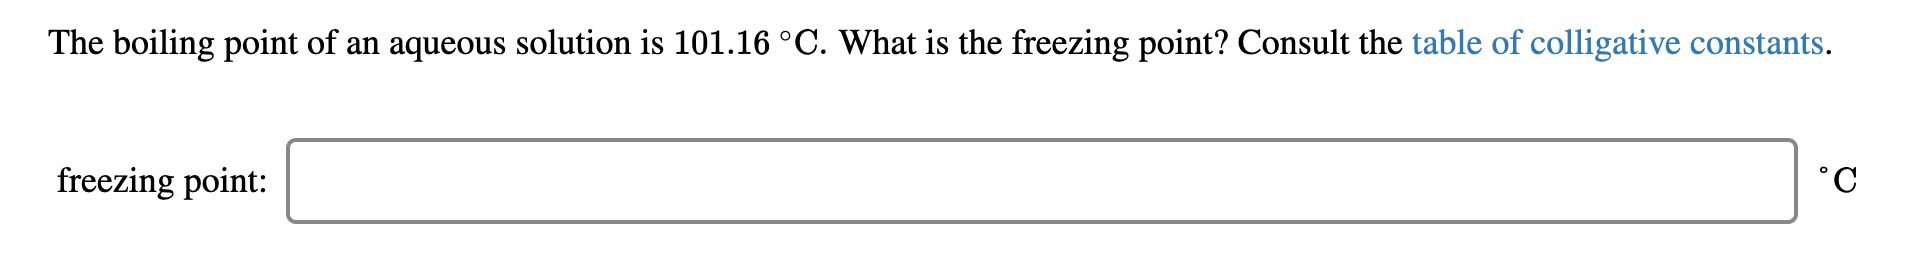 The boiling point of an aqueous solution is 101.16 °C. What is the freezing point? Consult the table of colligative constants.
freezing point:
p.
